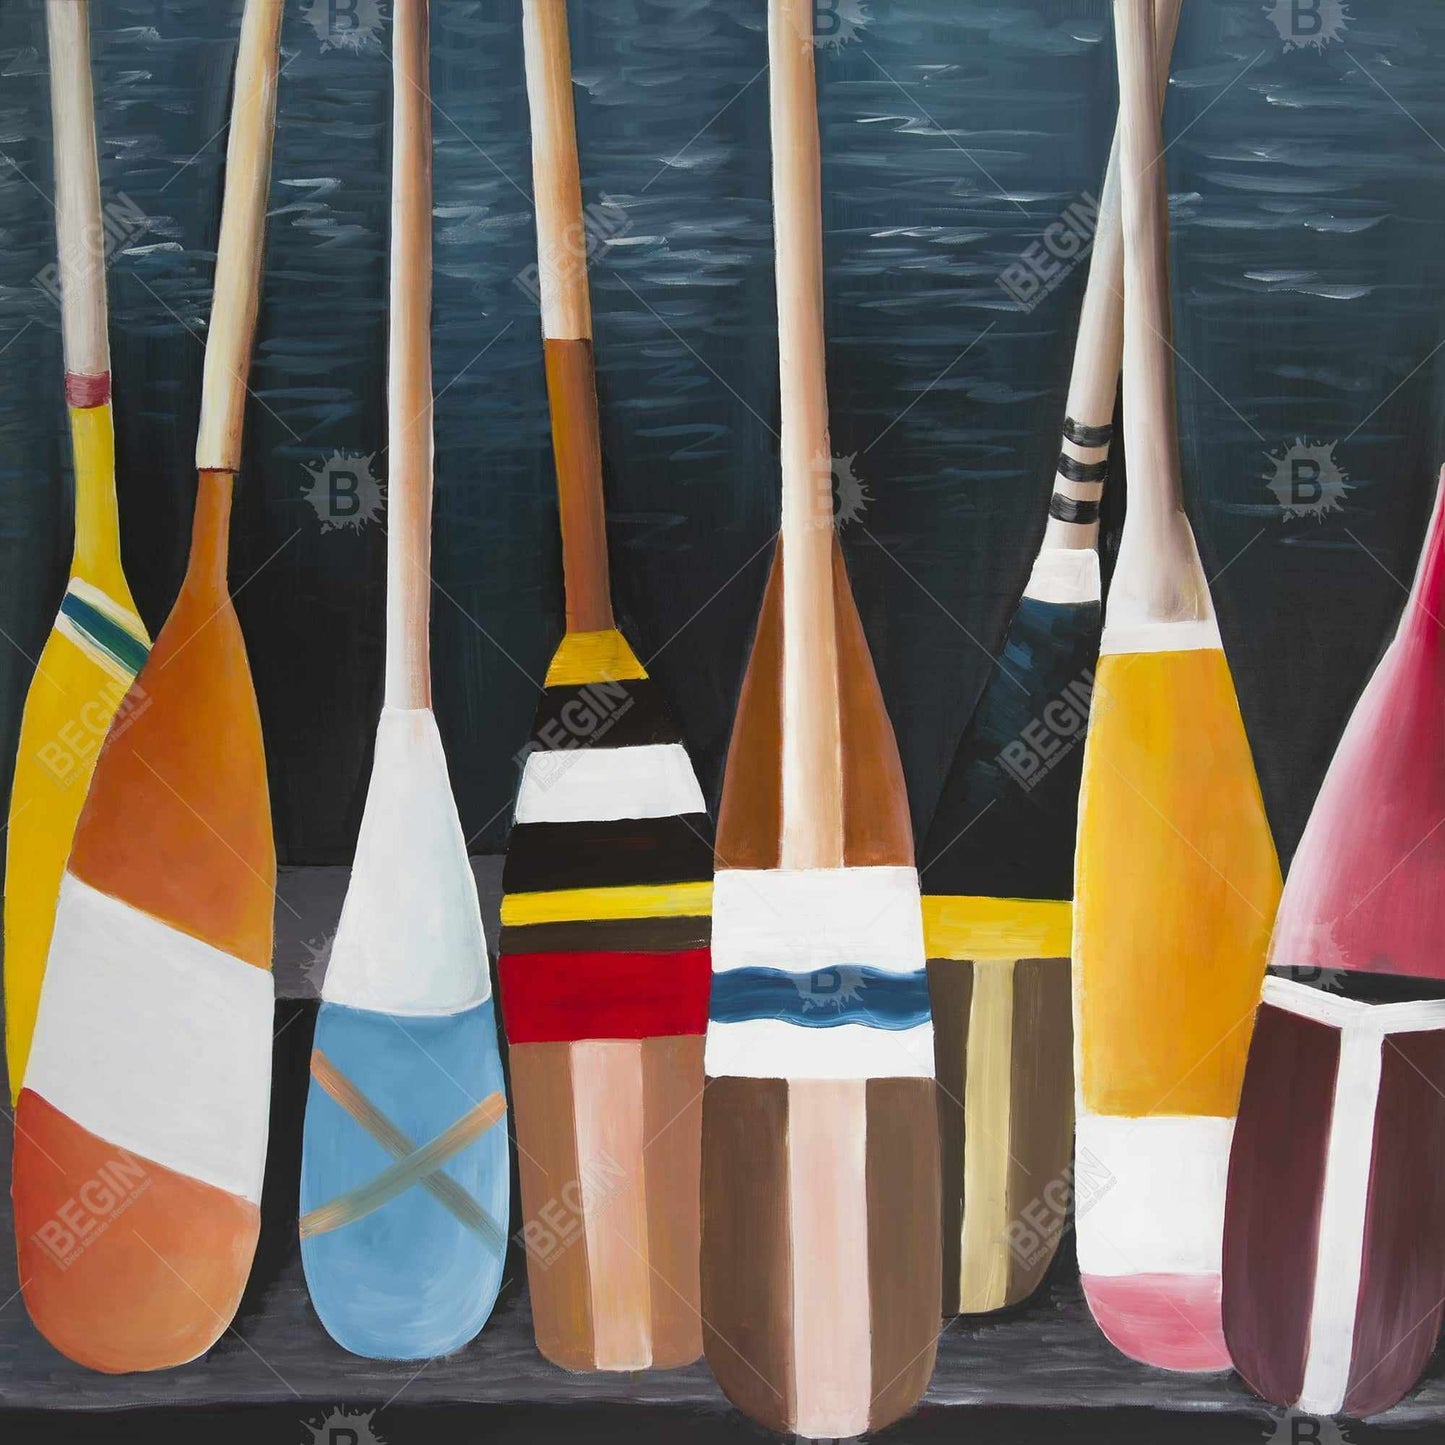 Colorful paddles - 32x32 Print on canvas